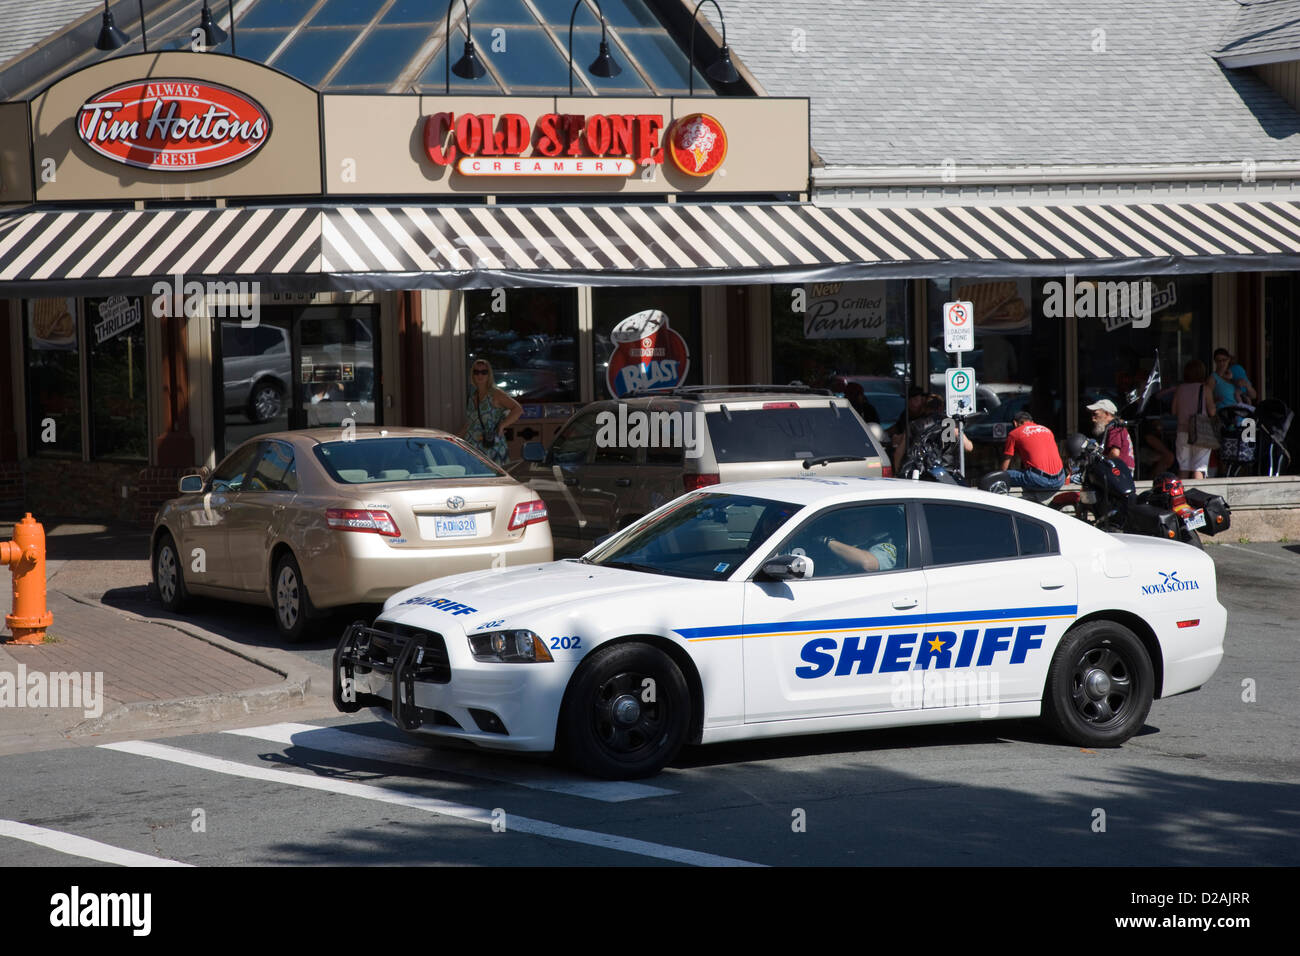 The sheriff's police car parked outside the Cold Stone Creamery and Tim Hortons in Halifax Stock Photo